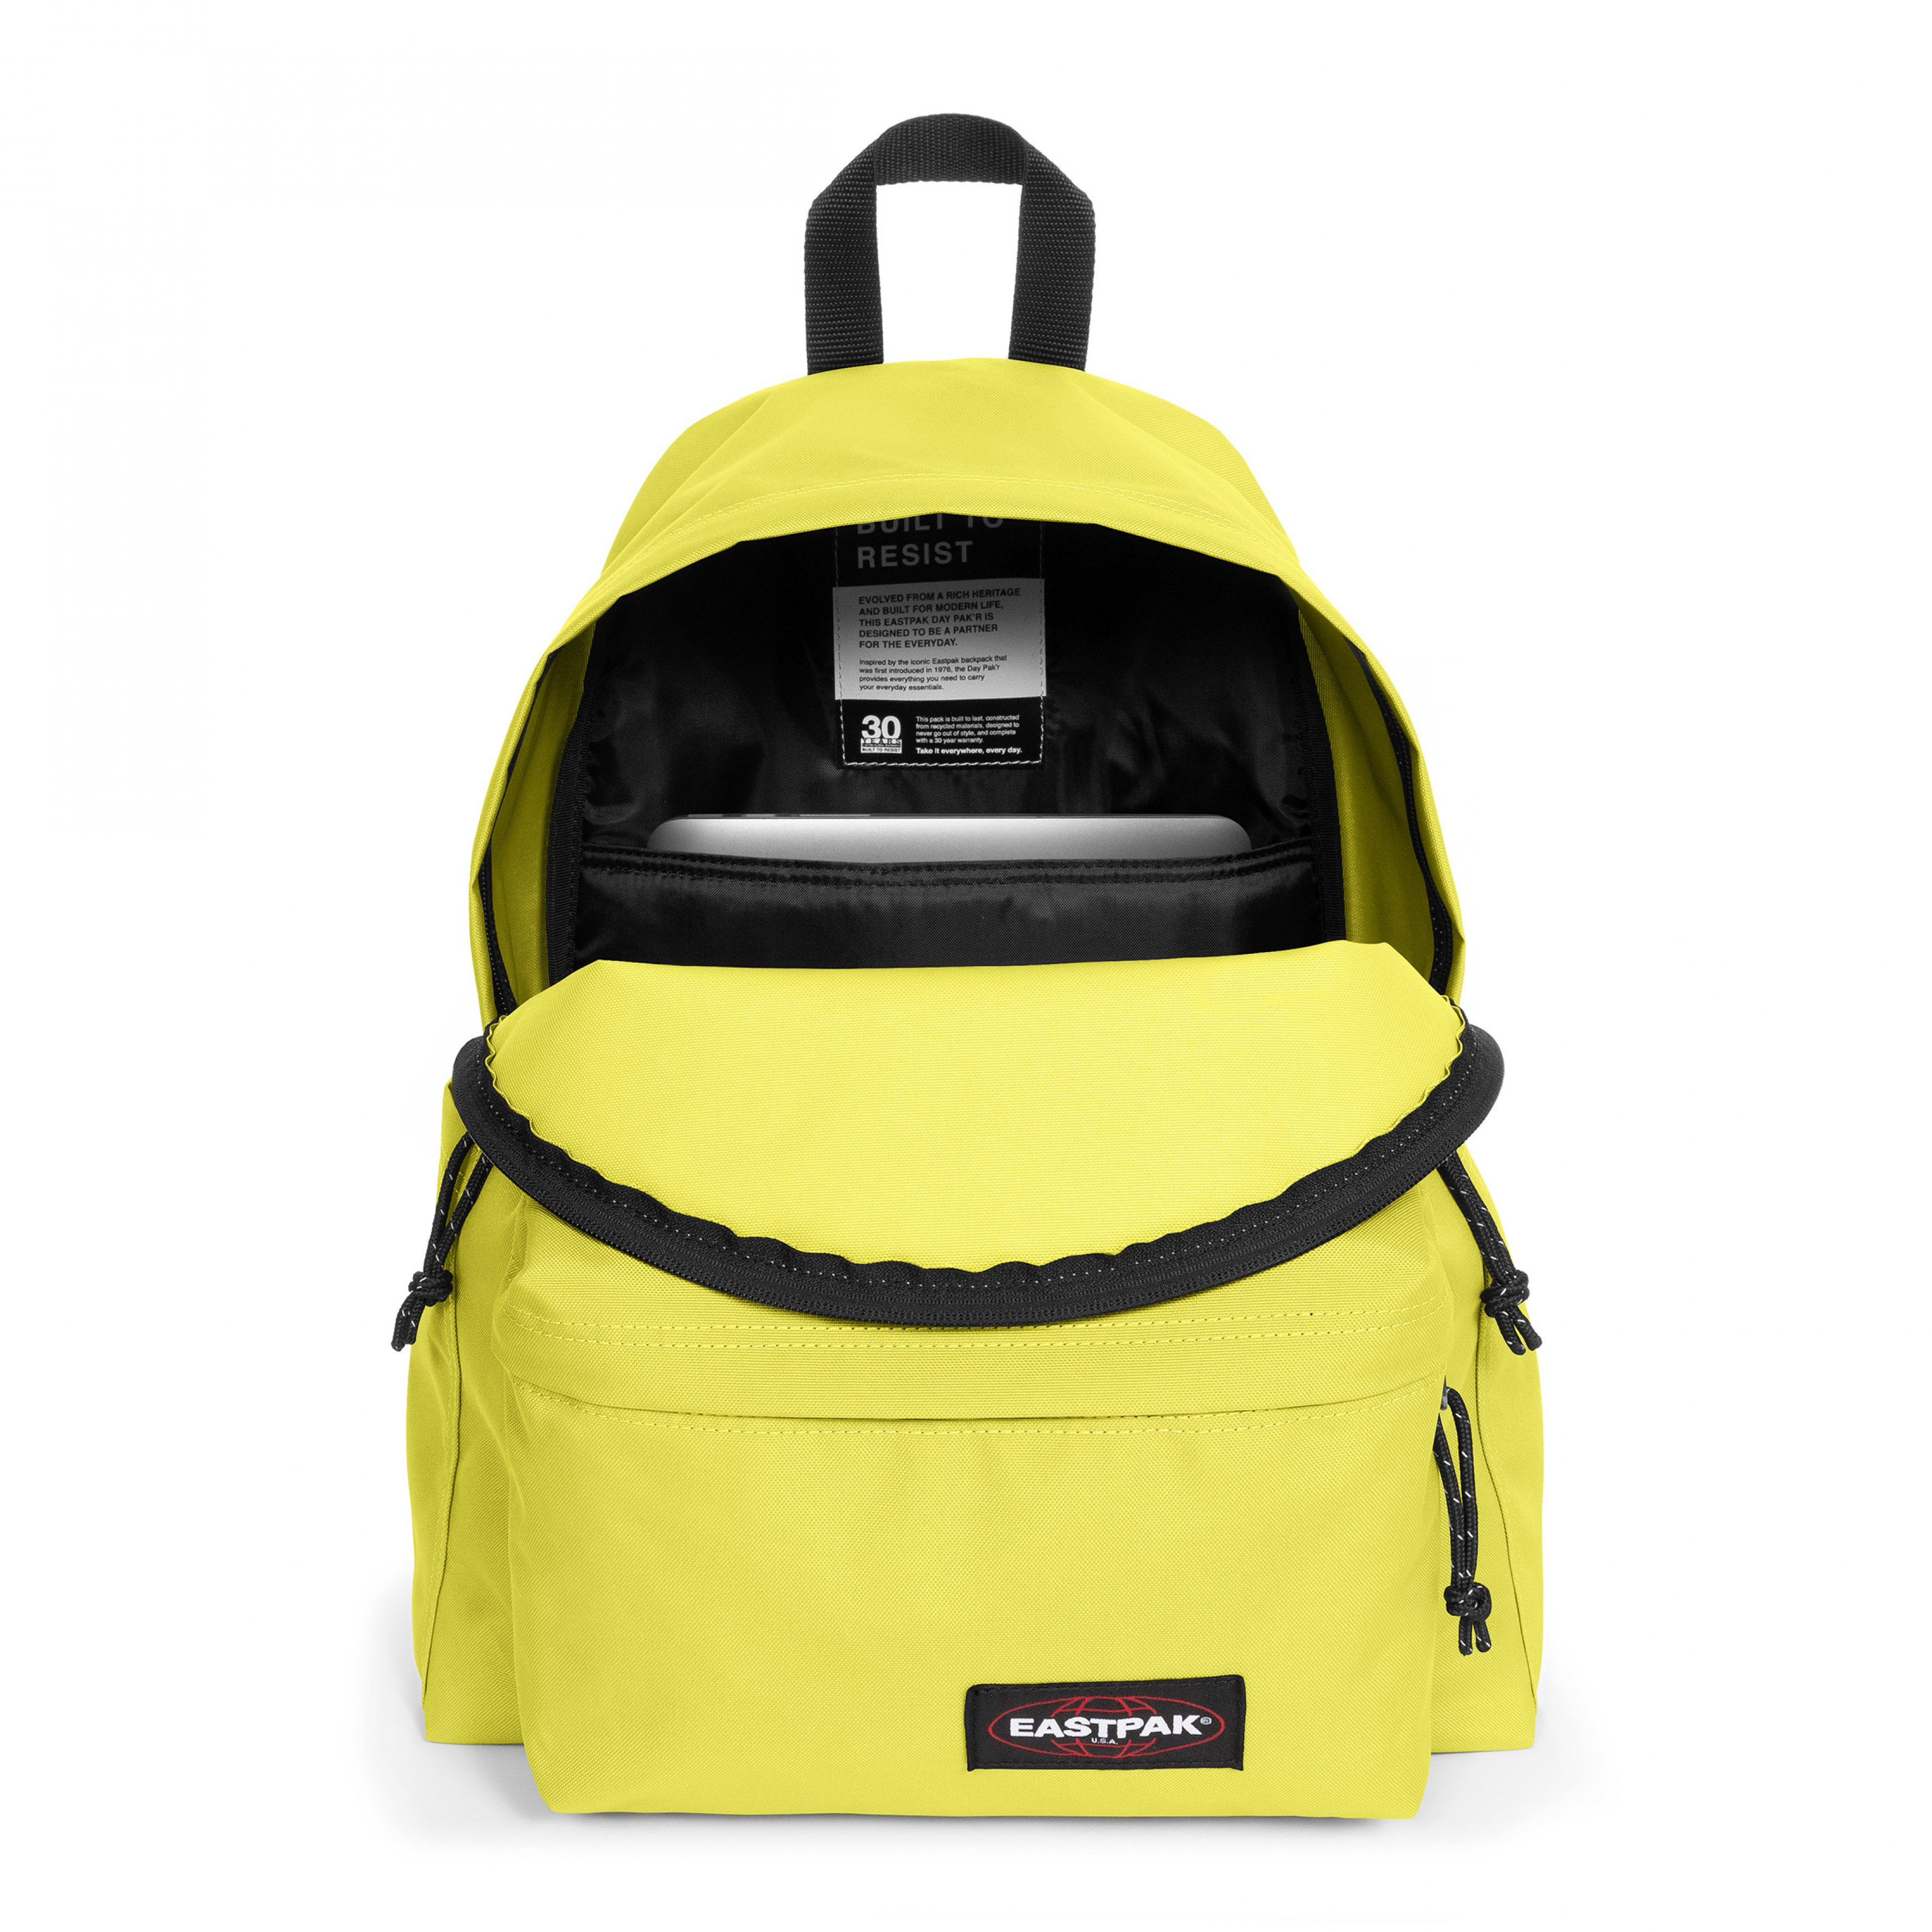 Eastpak - Day Pak'r Neon Lime backpack, Yellow, large image number 1